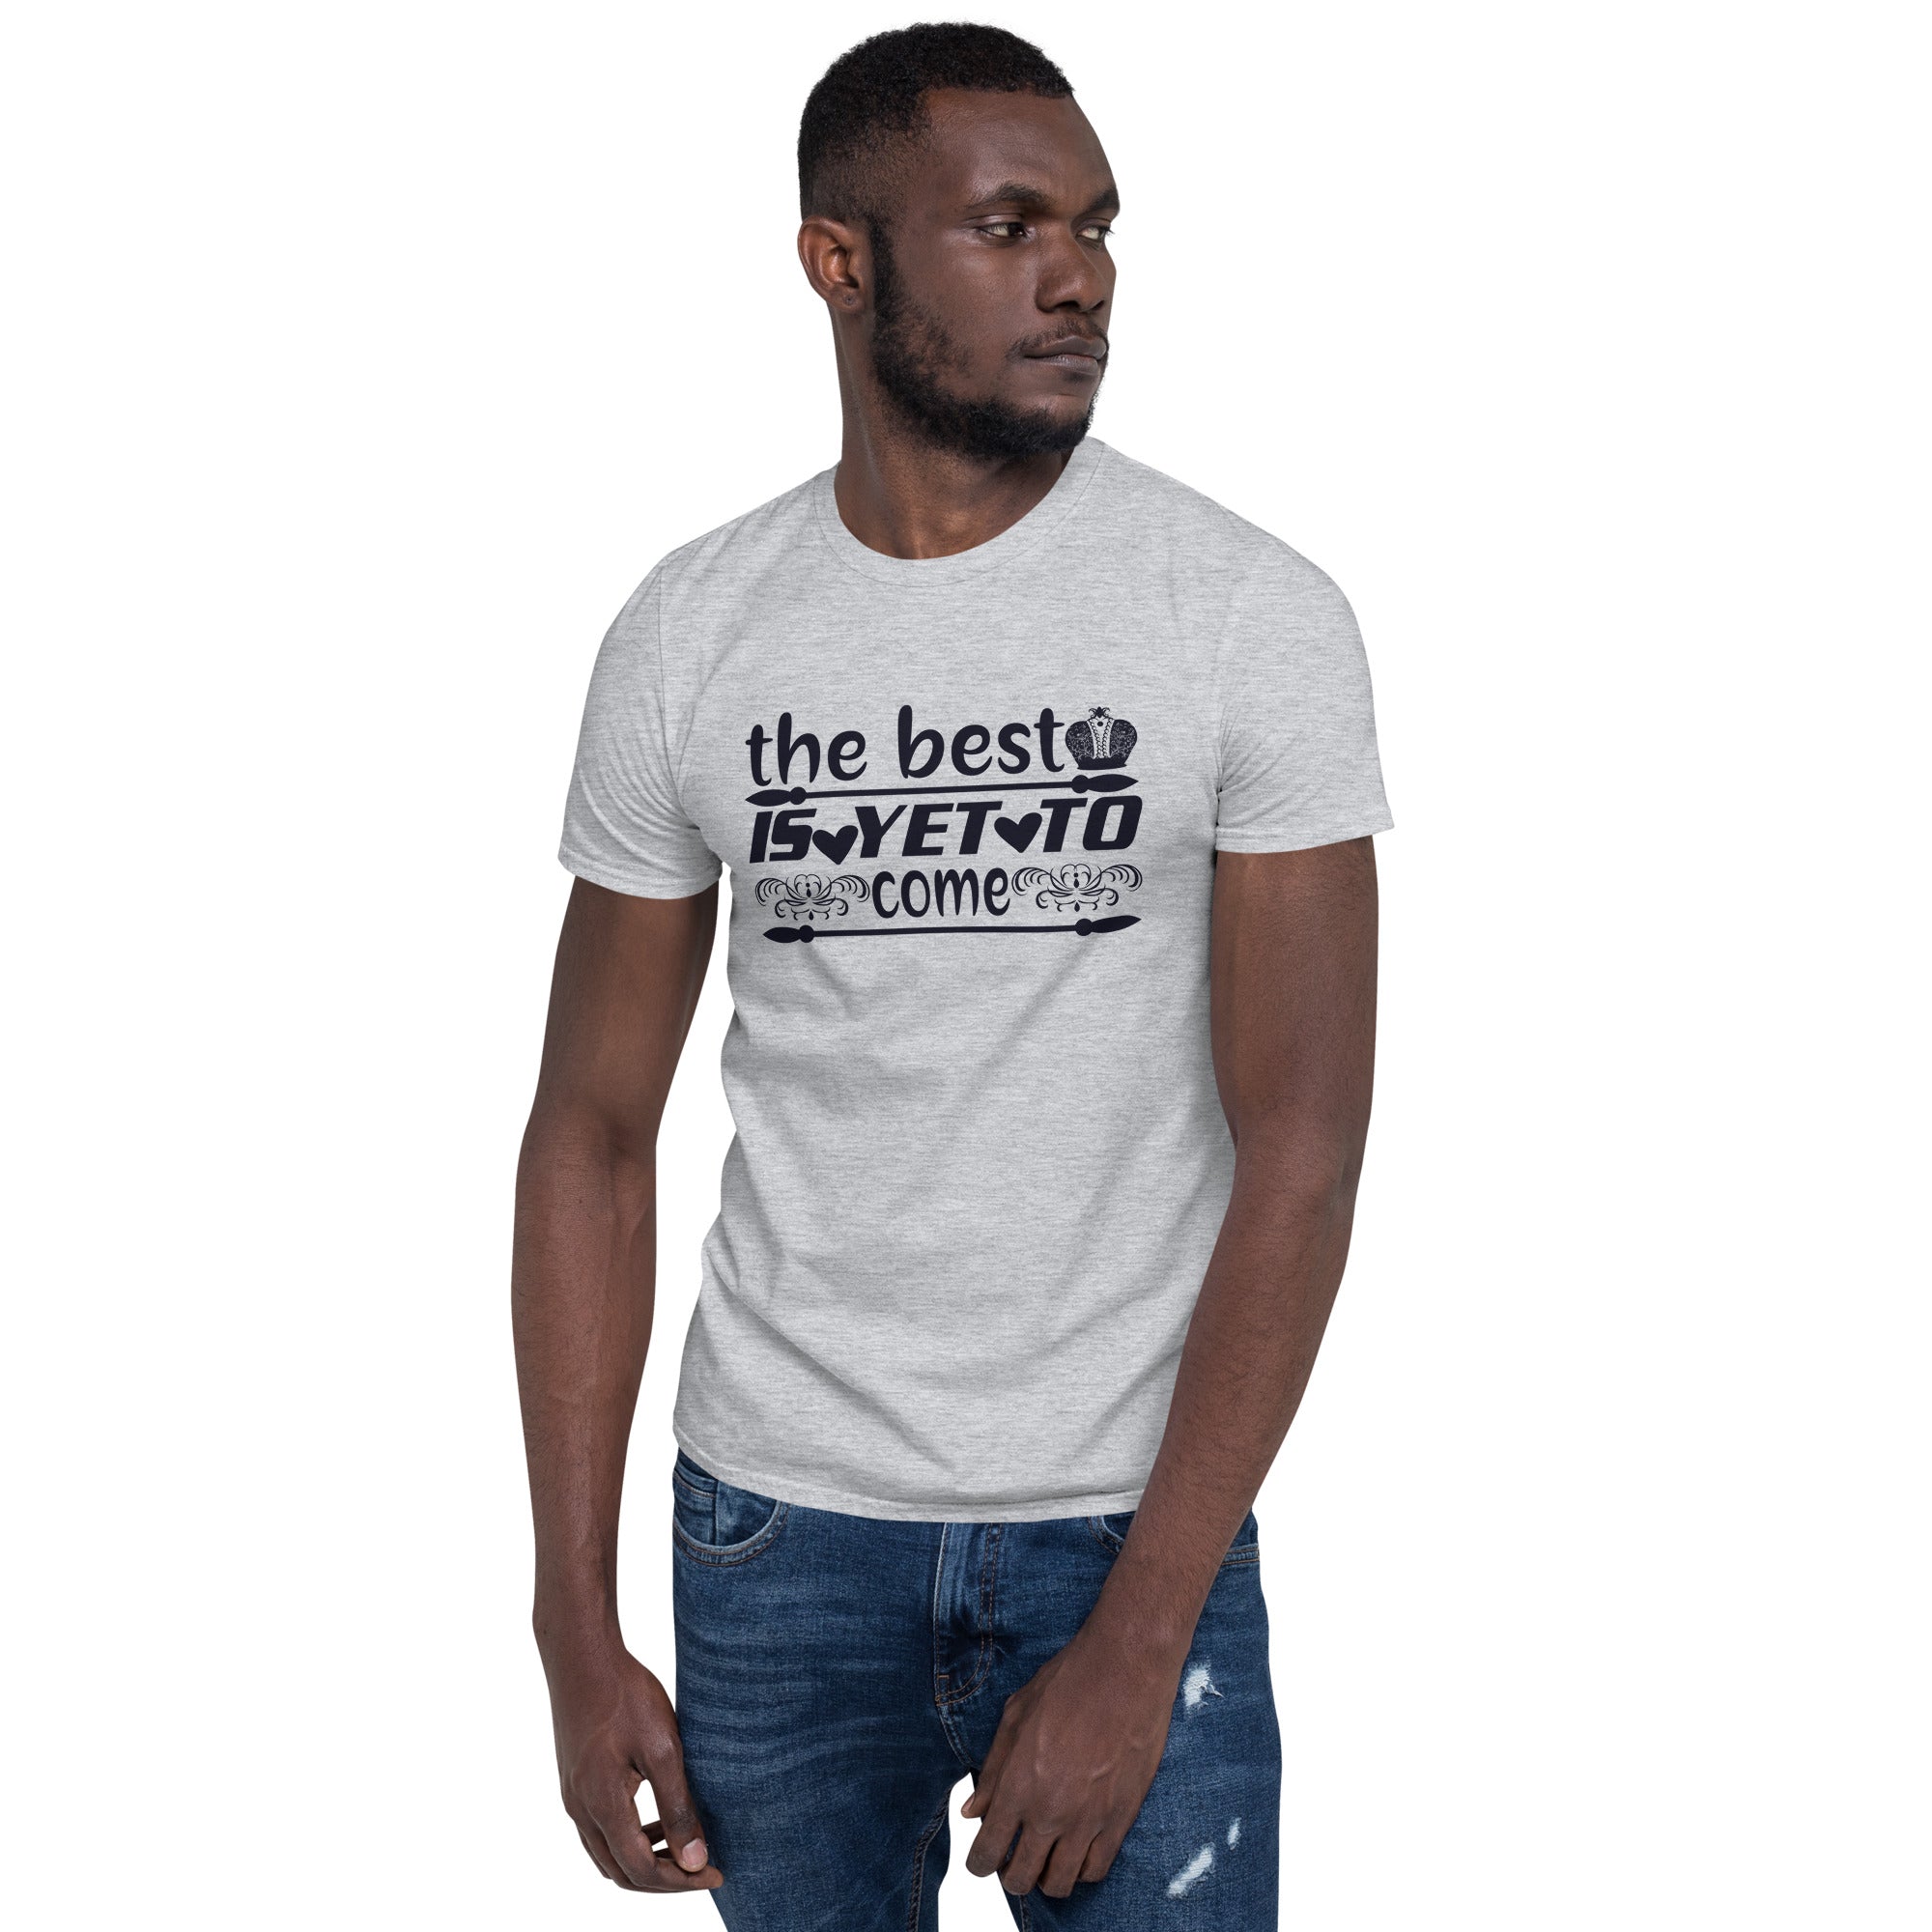 The Best Is Yet To Come - Short-Sleeve Unisex T-Shirt